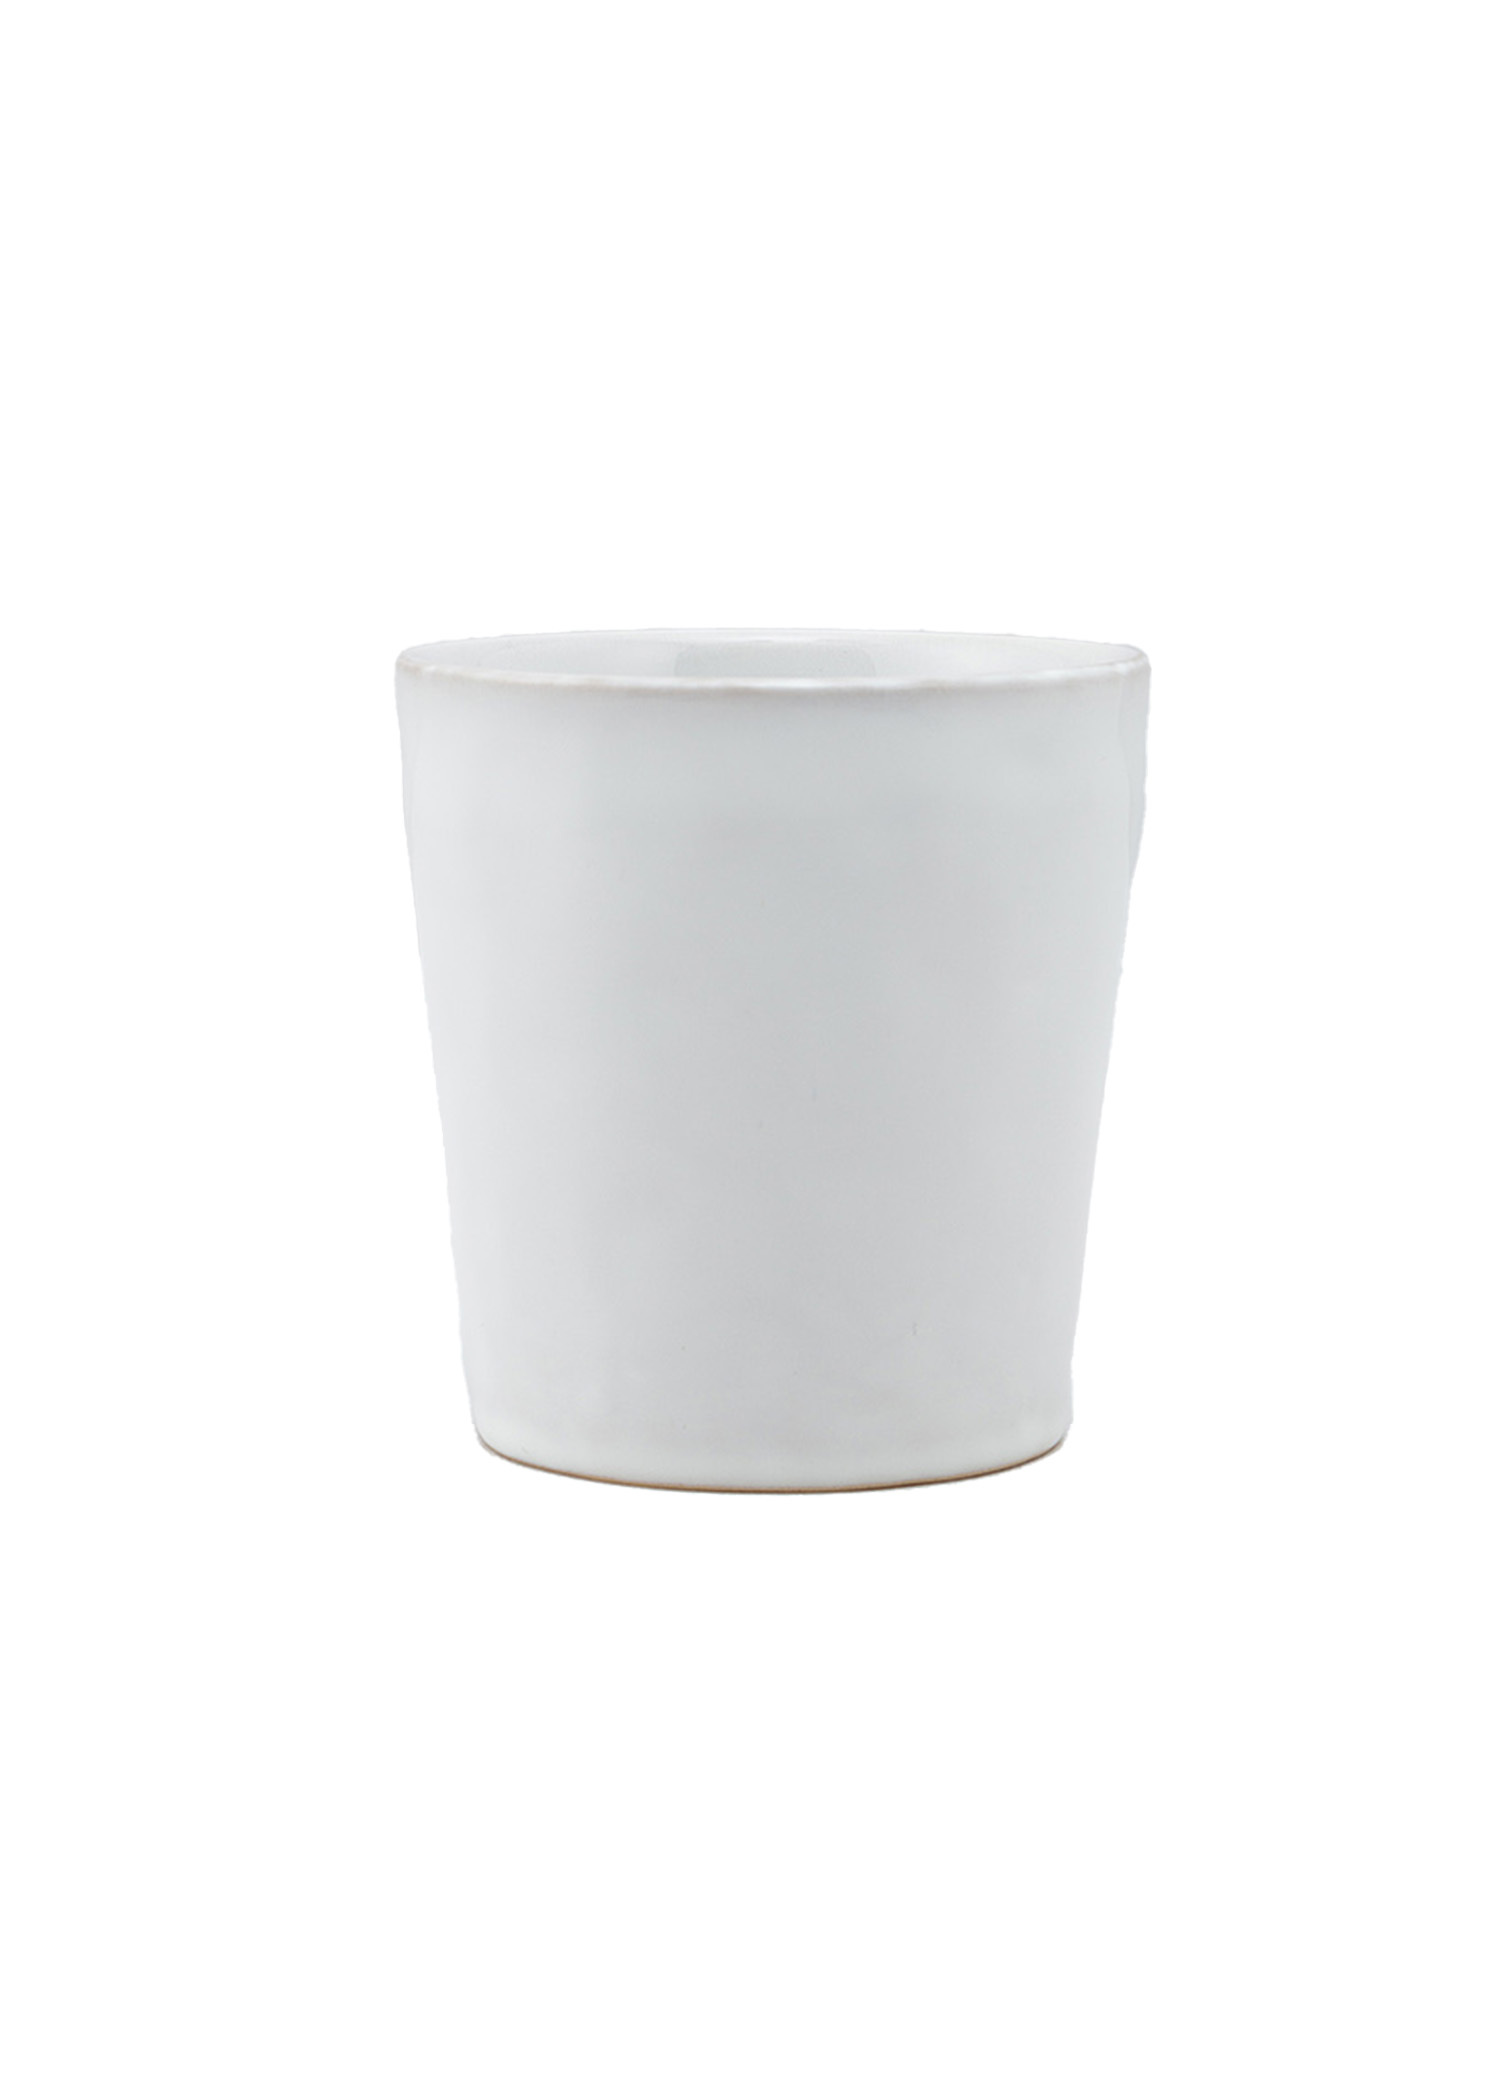 Stoneware cup Image 0